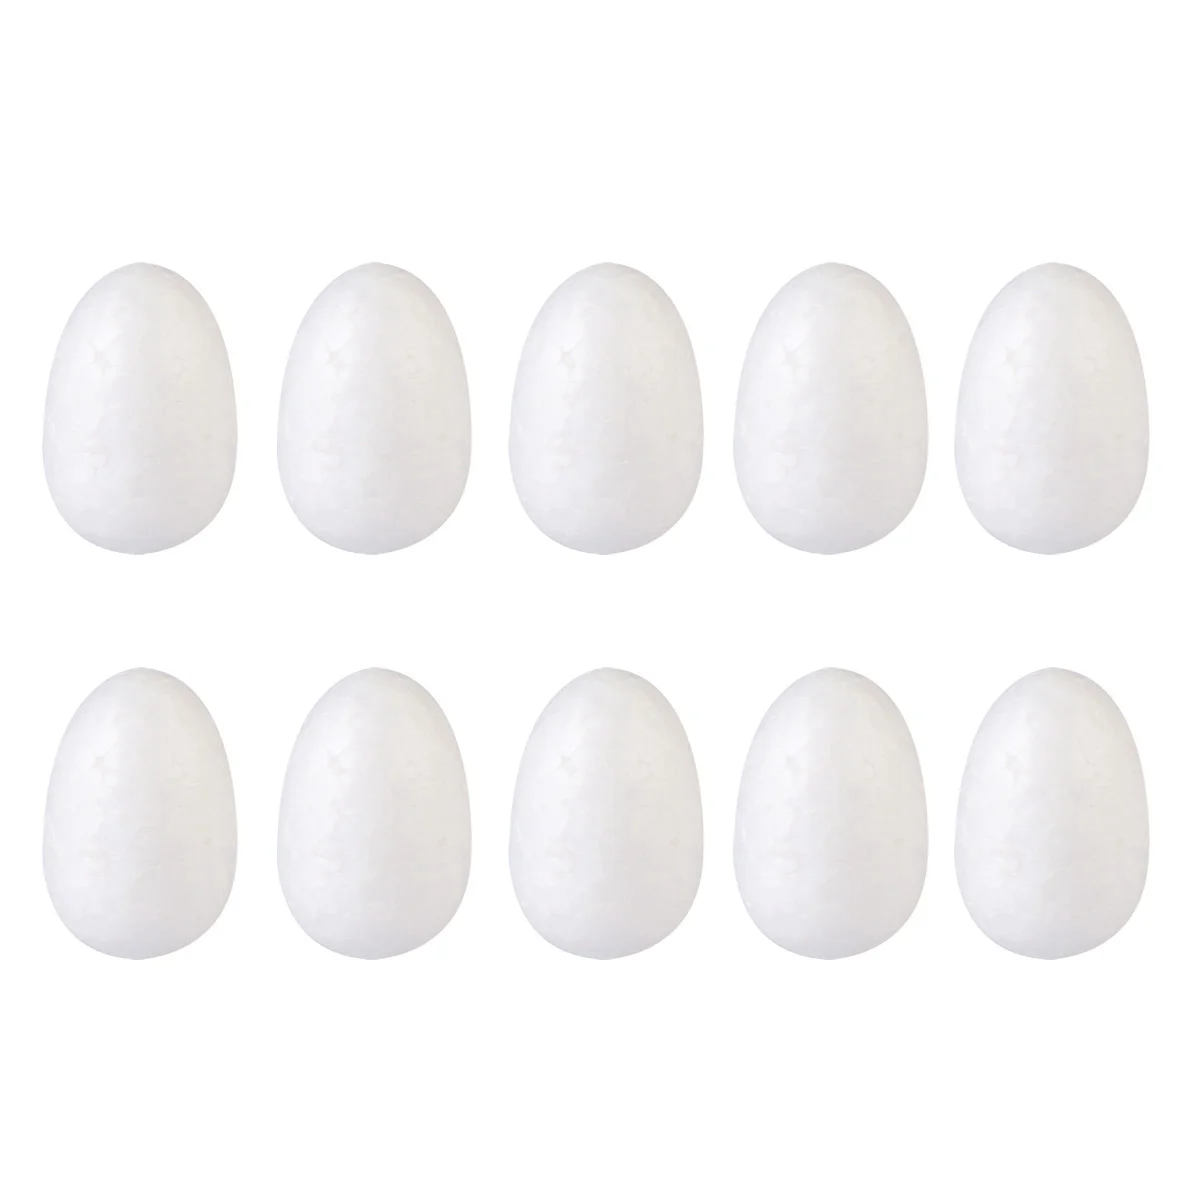 

Eggs Foam Easter Egg Craft Diy White Crafts Polystyrene Fake Painting Inch Smooth Shapes Decor Ornaments Decorations Kids